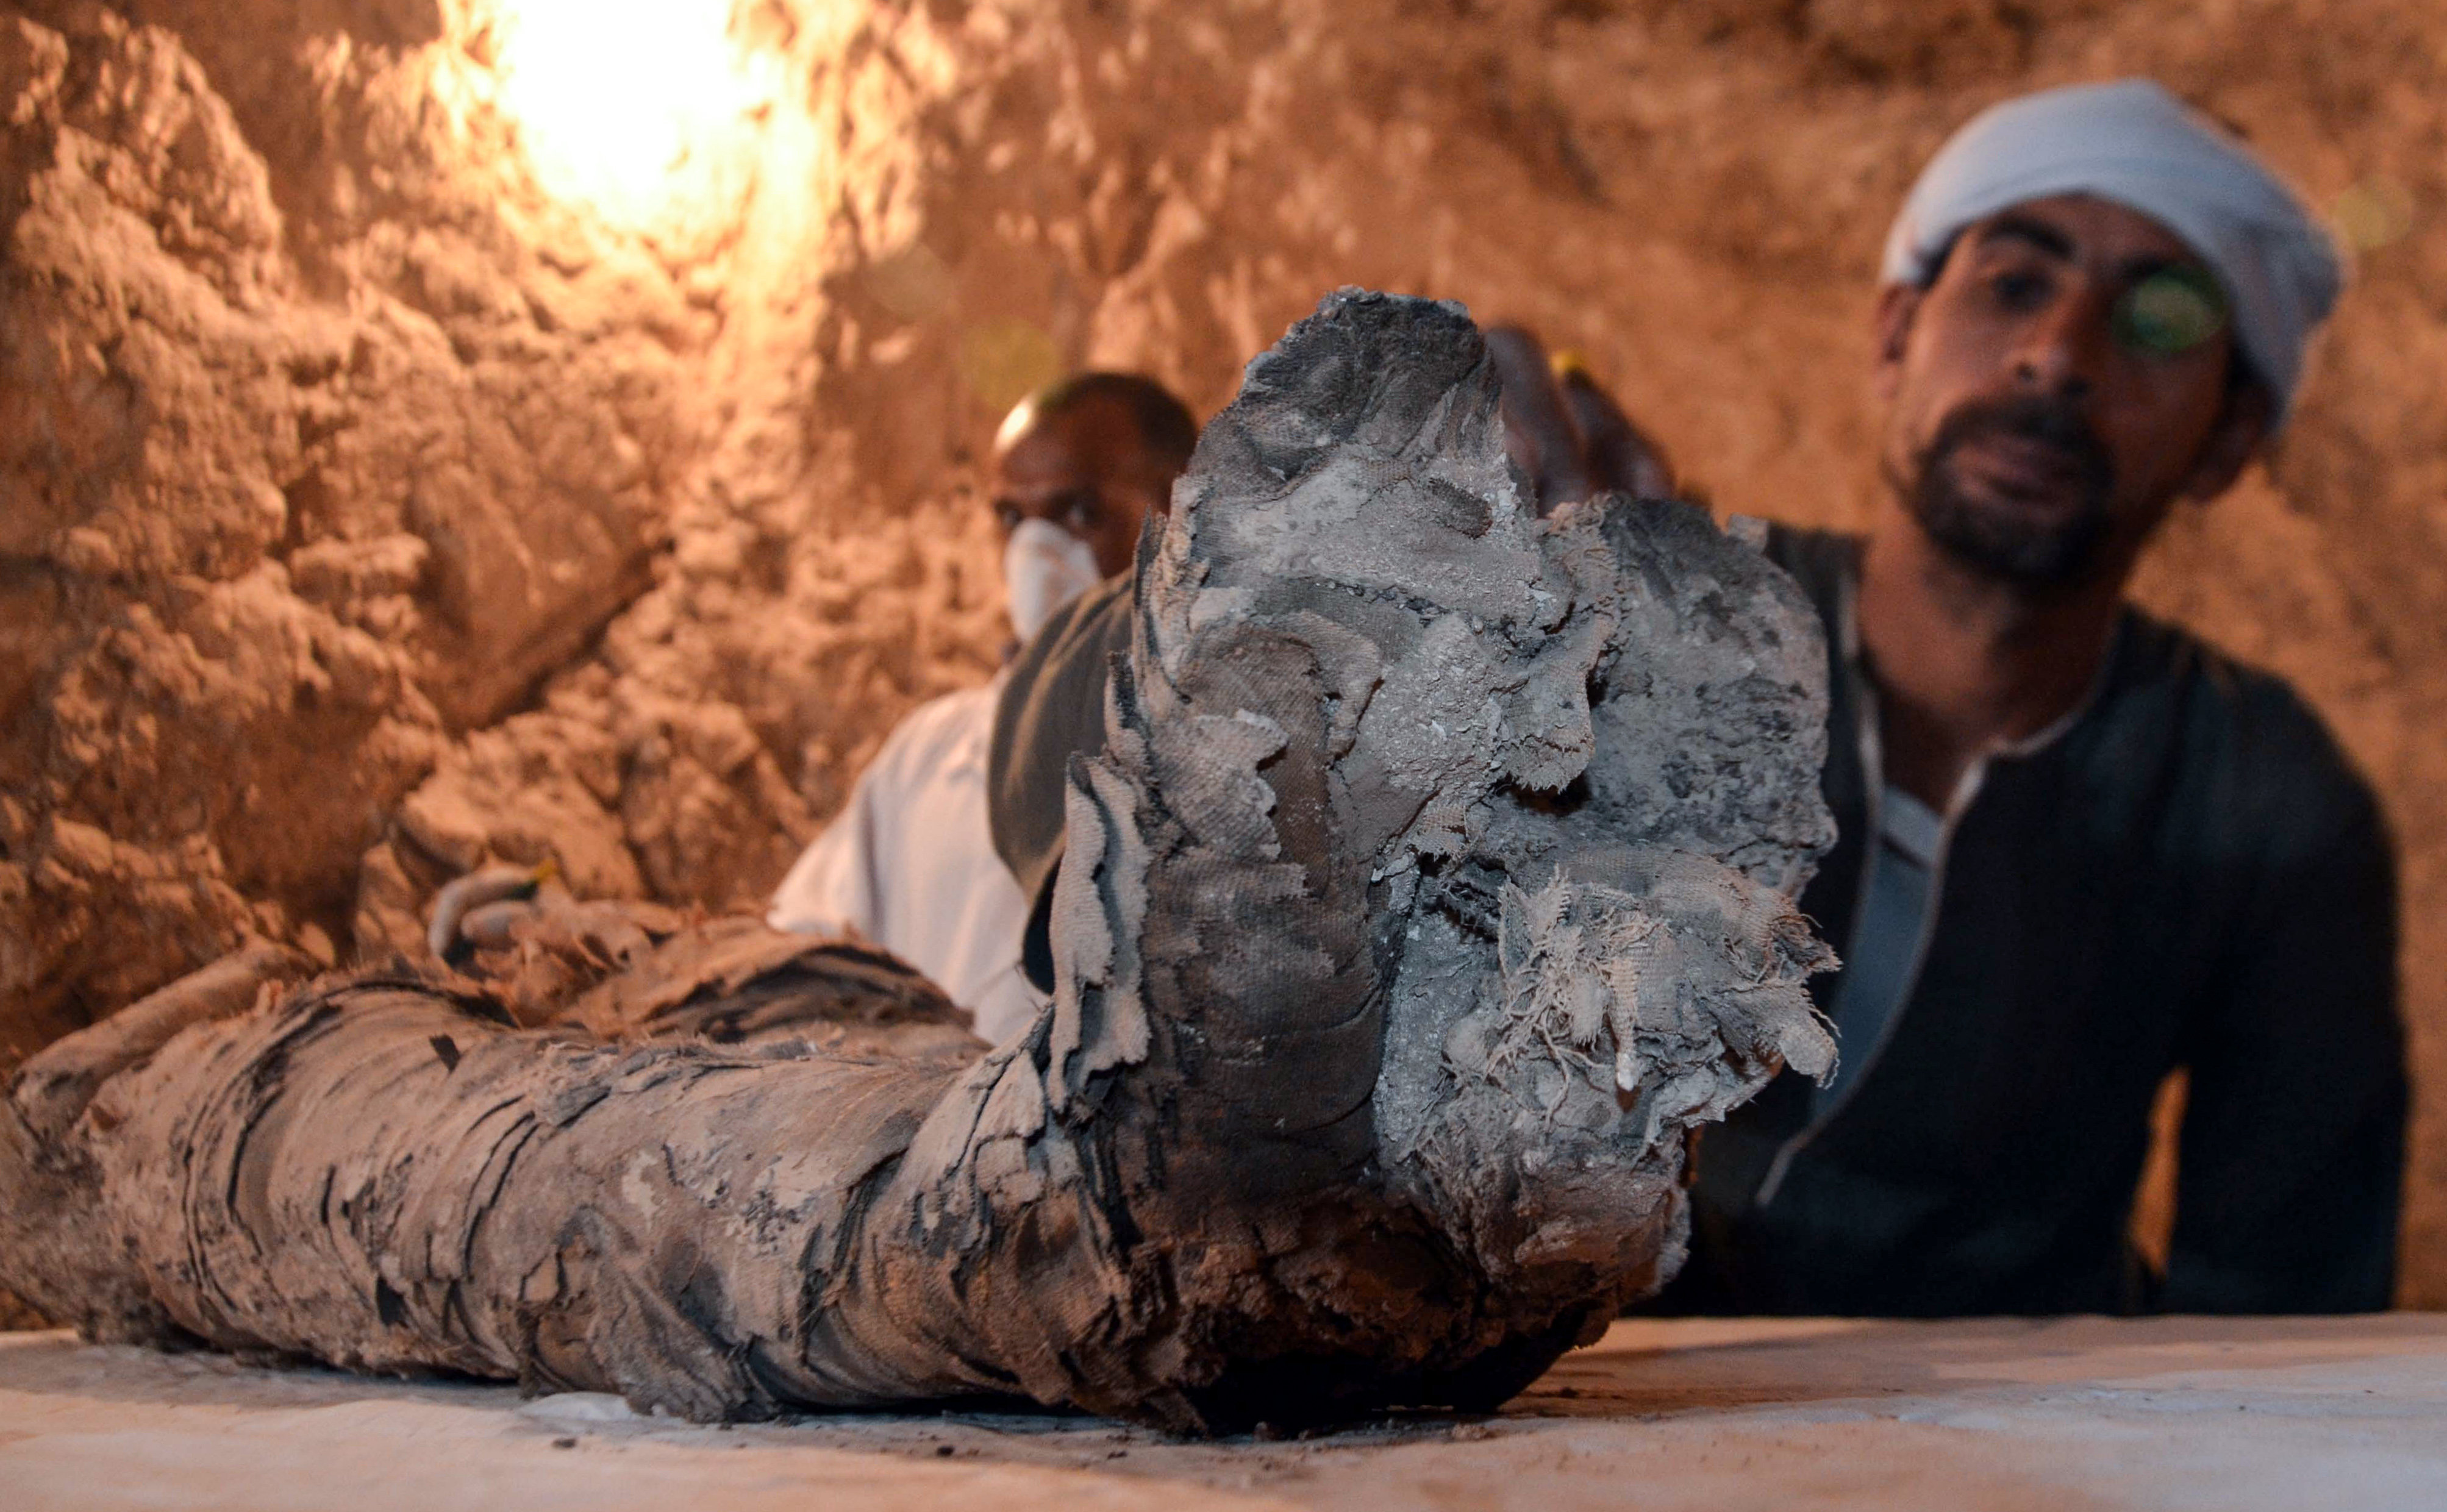 <strong>Although its identity is not yet know, the mummy is believed to be a top official from the 18th dynasty, given where it was found&nbsp;</strong>